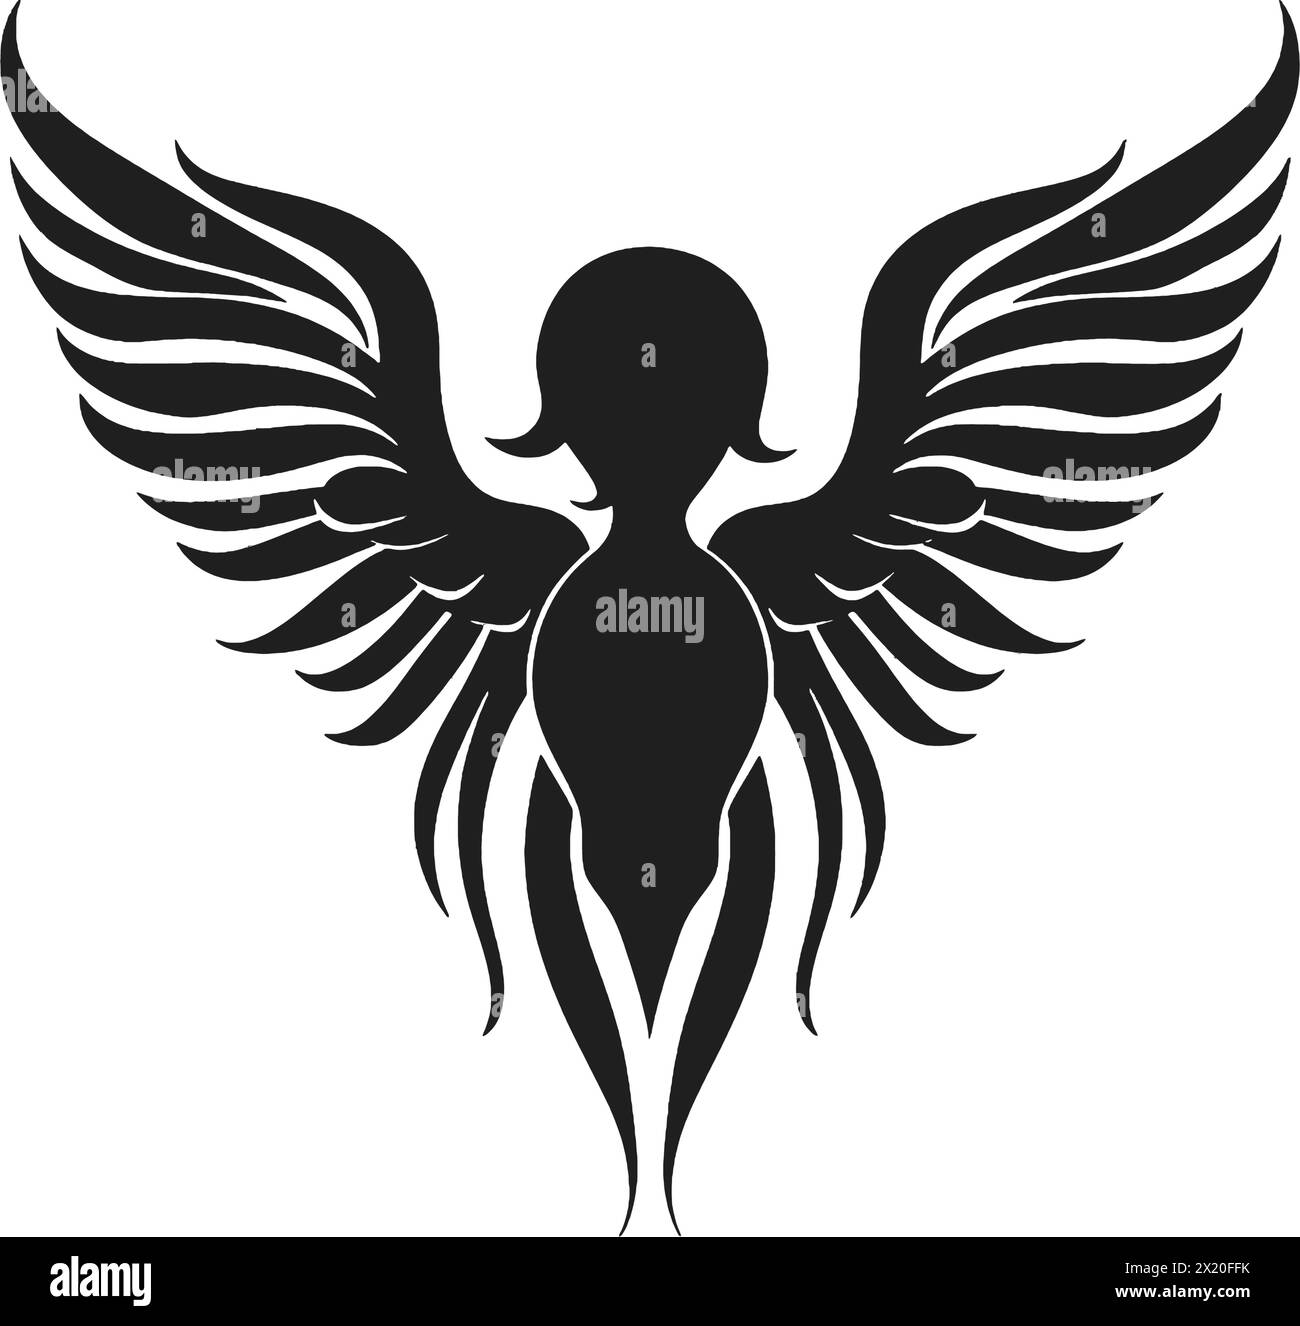 Vector illustration of a angel tattoo in black silhouette against a clean white background, capturing graceful forms. Stock Vector